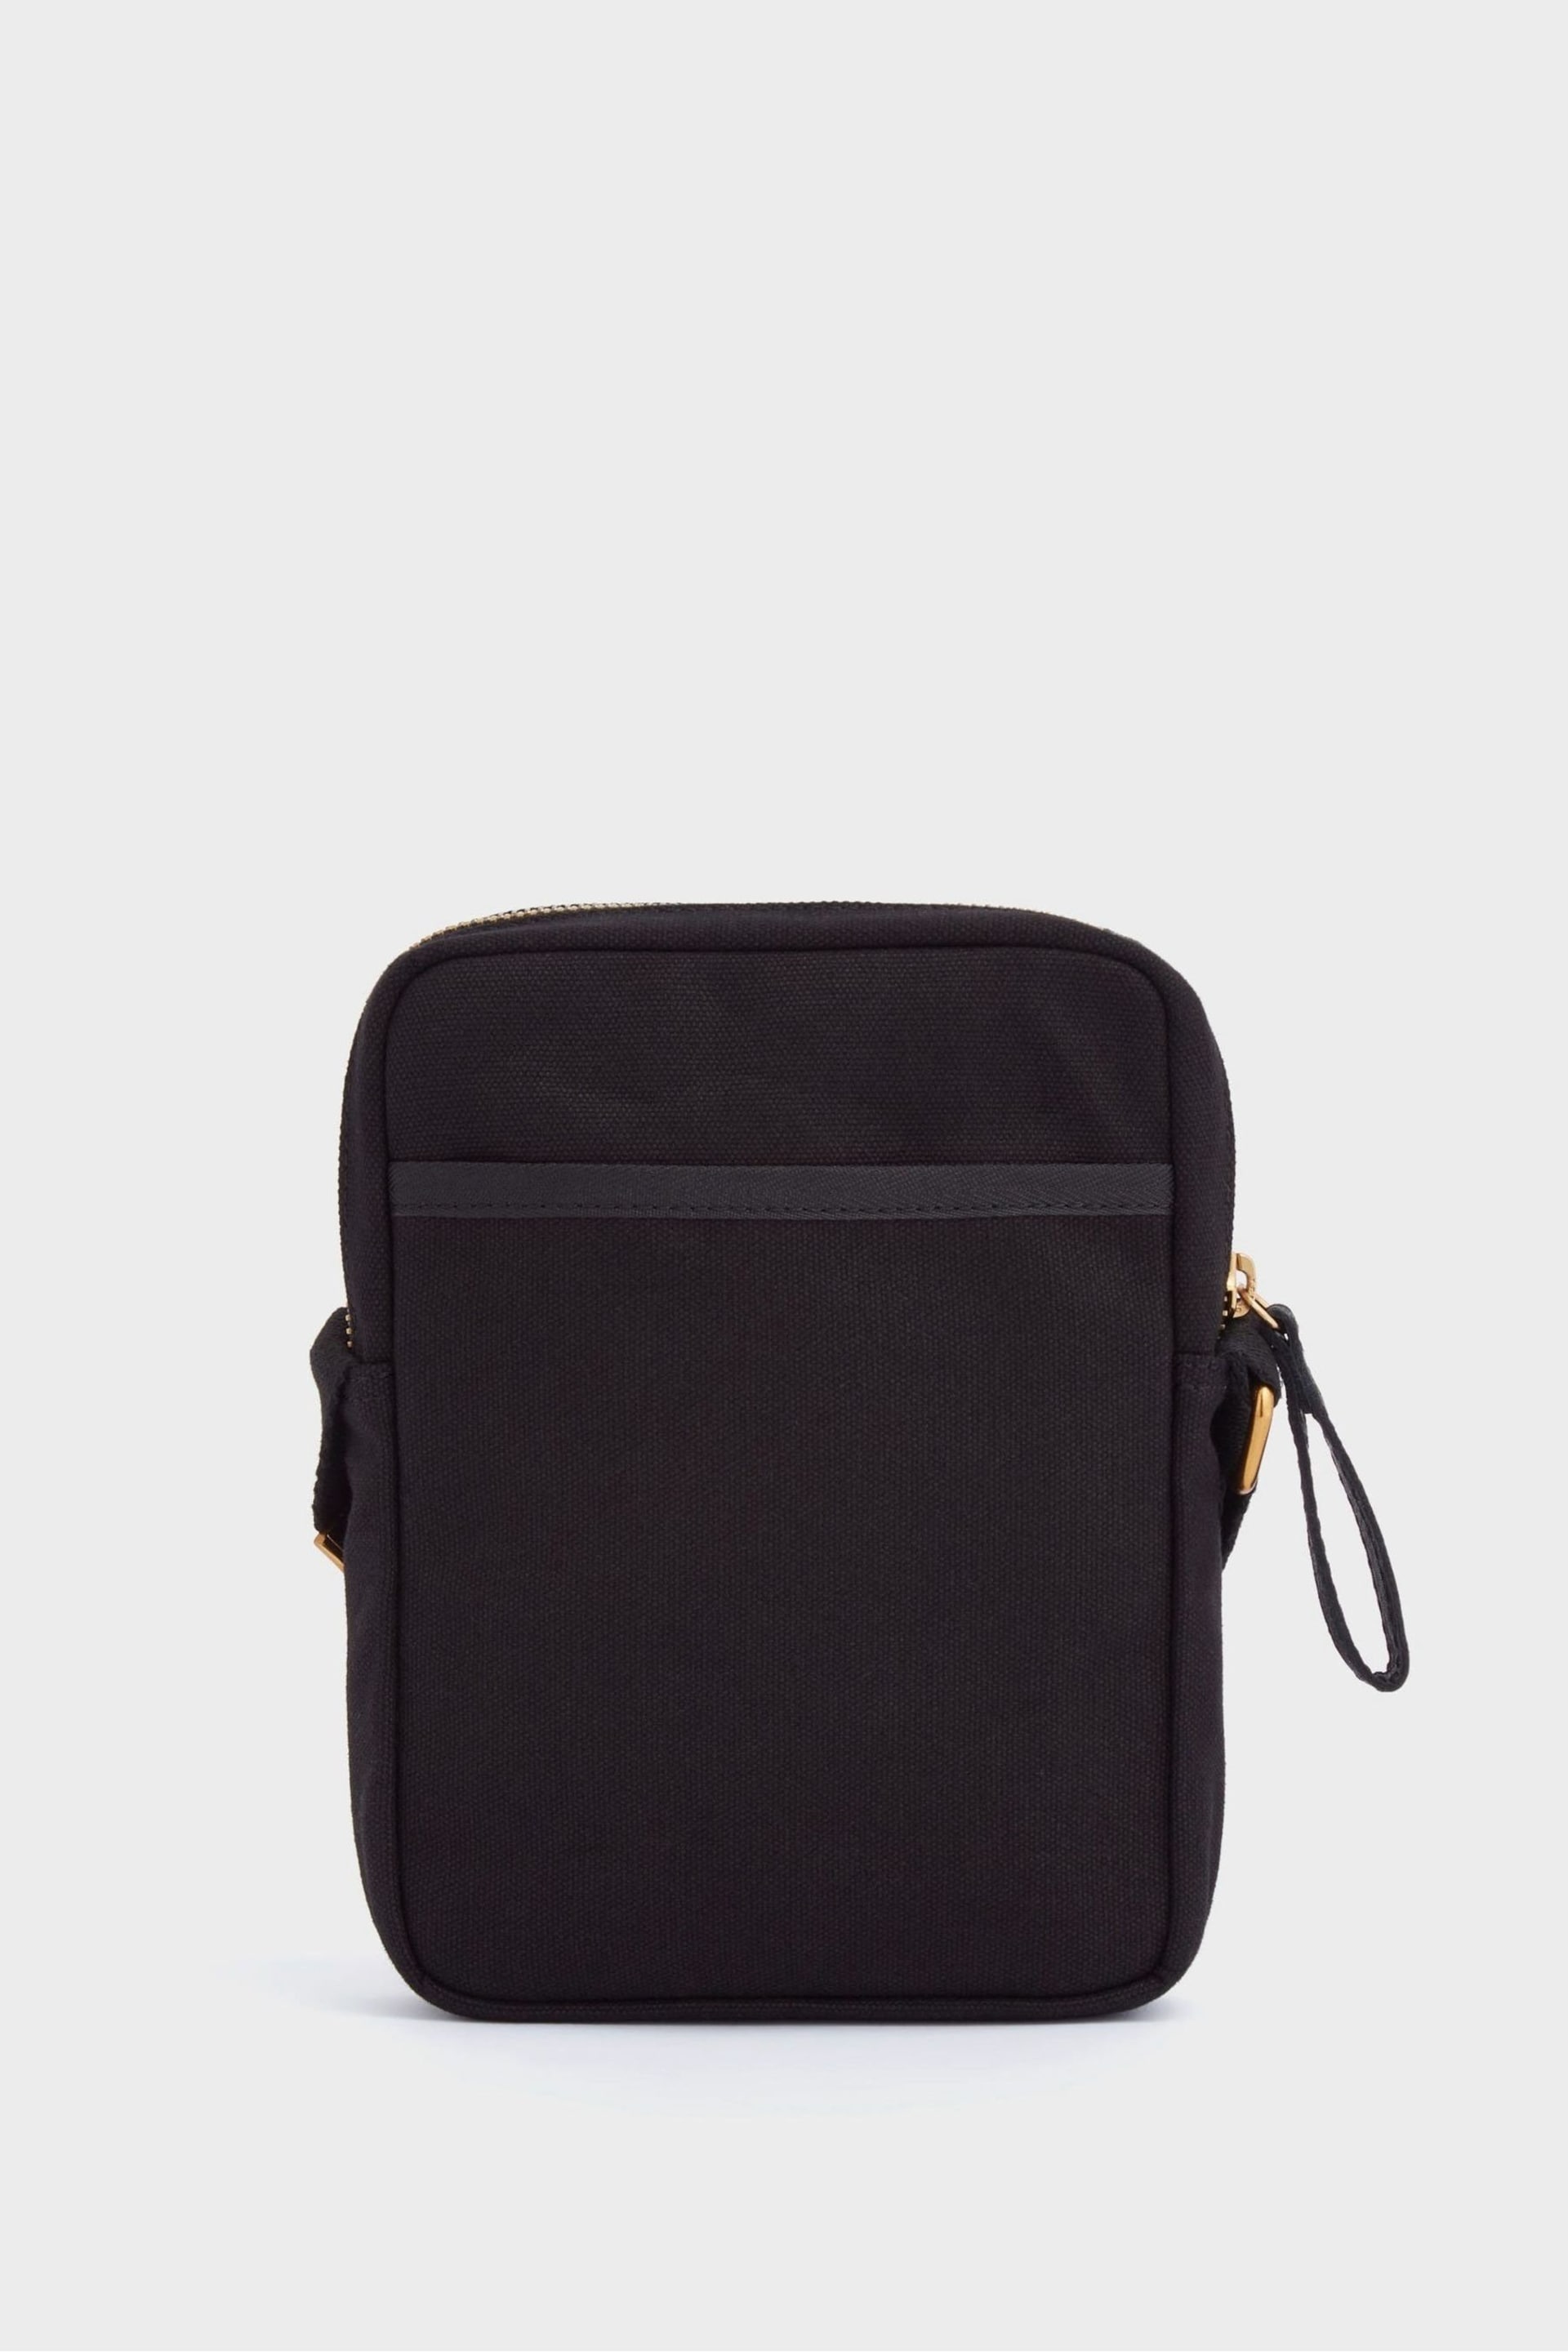 OSPREY LONDON The Studio Packable Phone Bag - Image 5 of 7